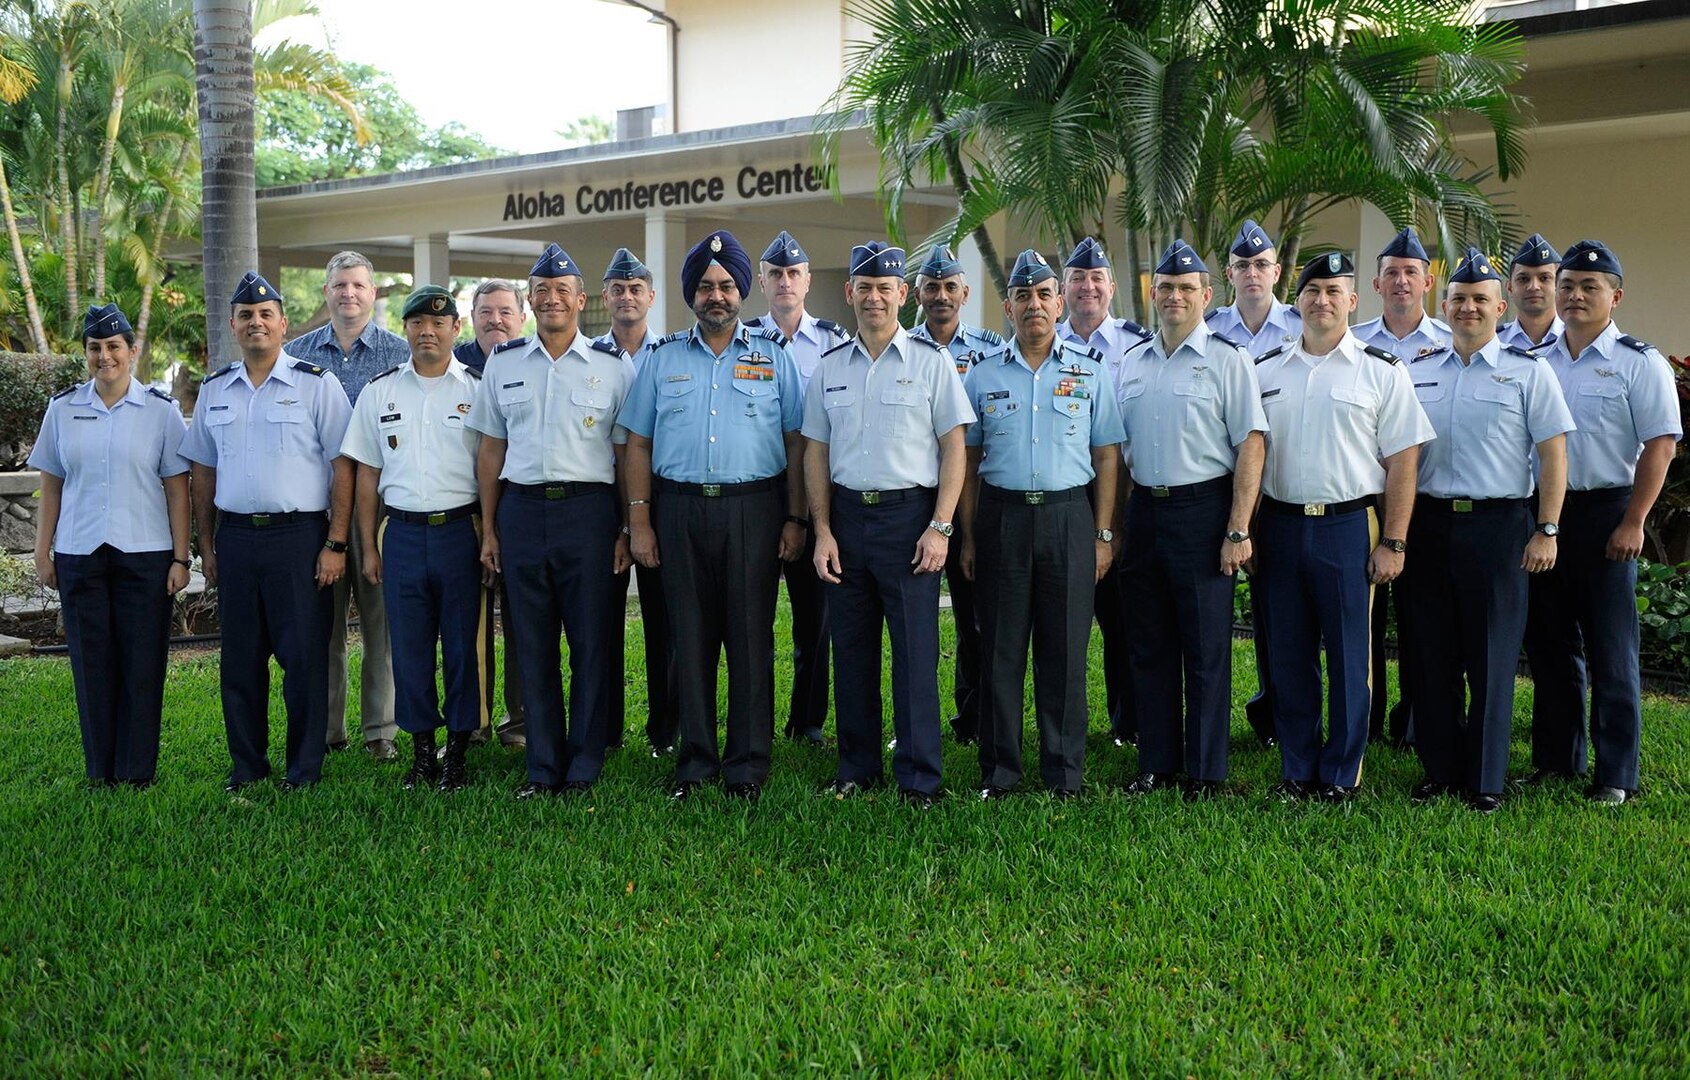 People's Liberation Army Air Force Command College Visits Headquarters  Pacific Air Forces > U.S. Indo-Pacific Command > 2015